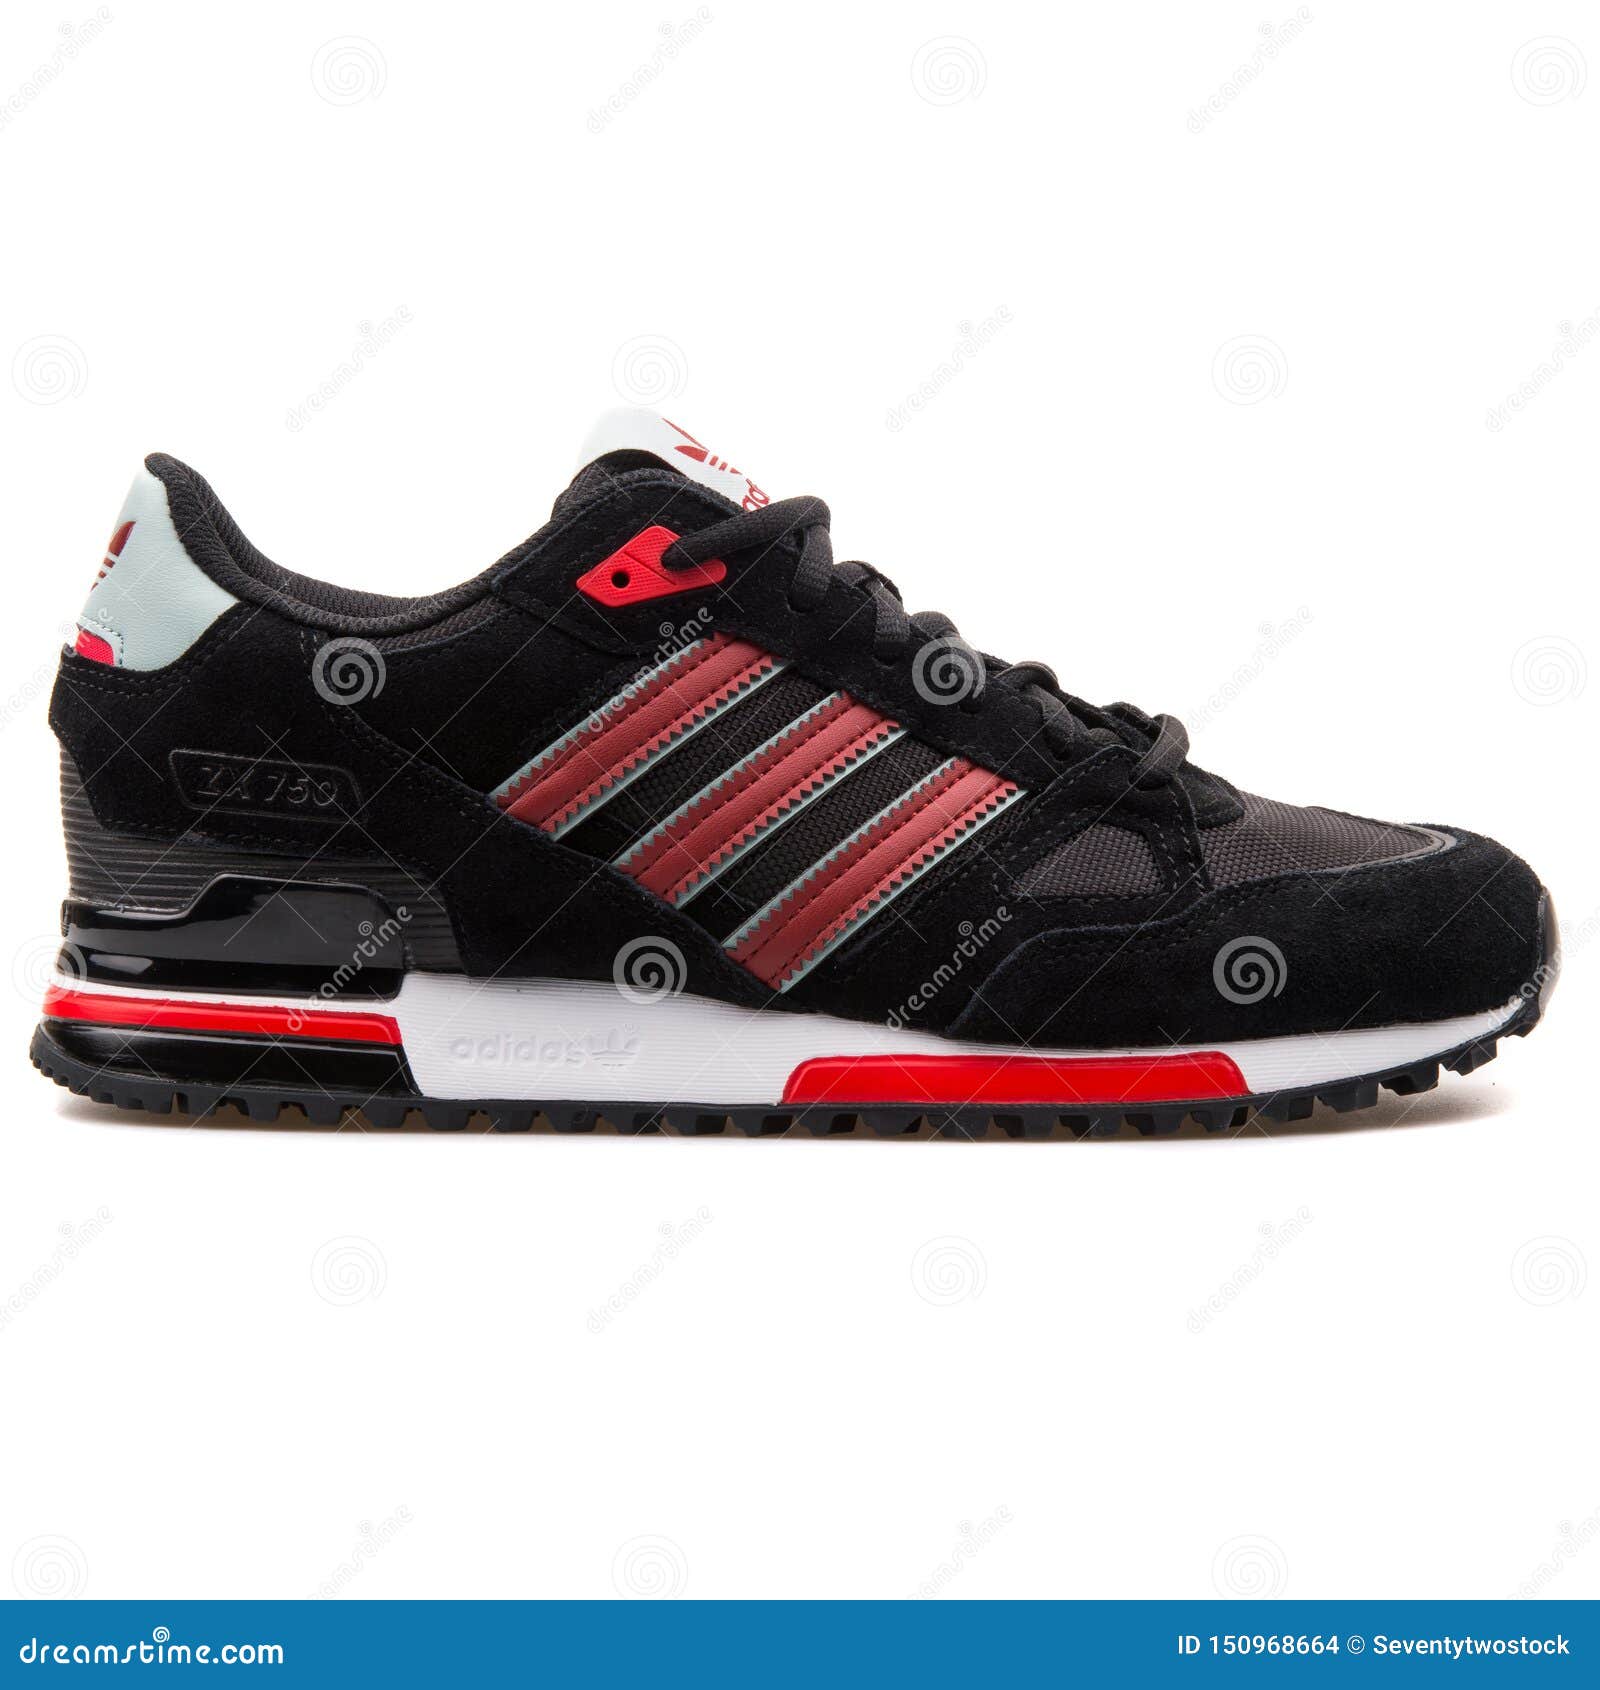 Adidas 750 Black and Red Editorial Image - of sneakers, athletic: 150968664